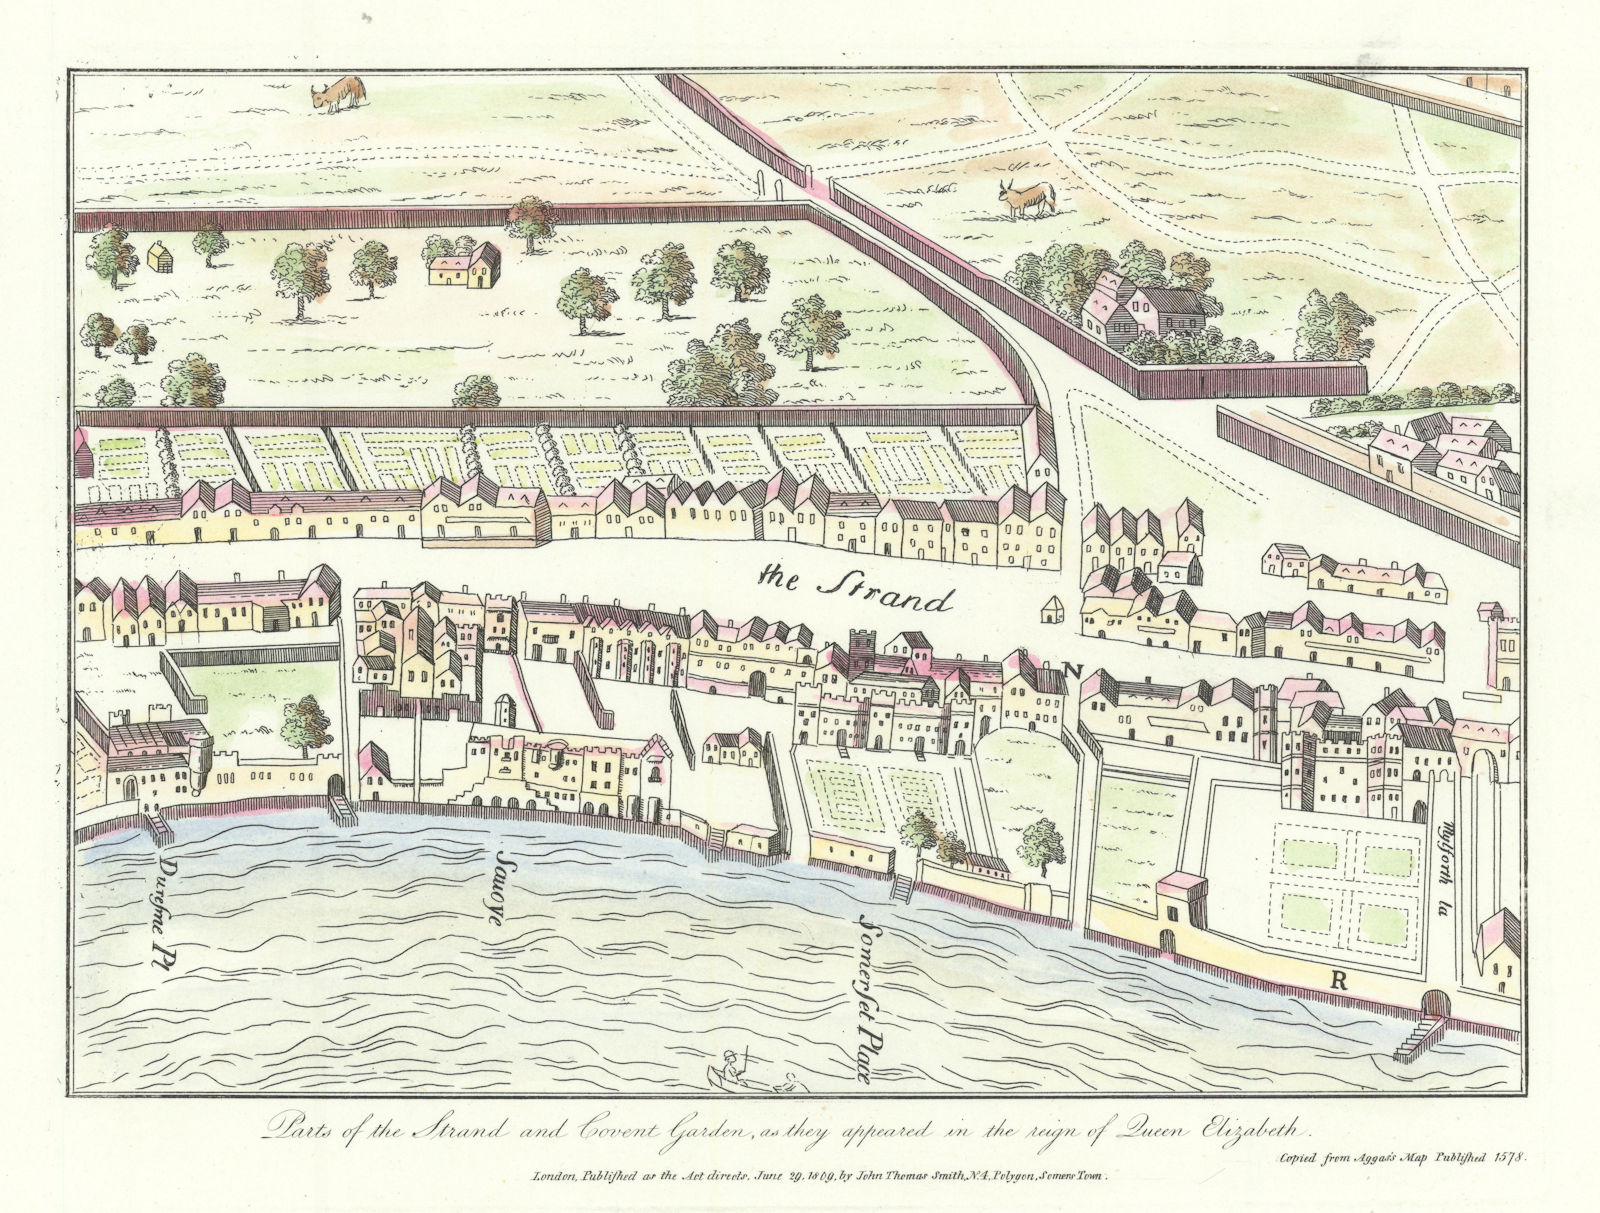 The original walled Covent Garden & Strand from Agas 1578 map J.T. SMITH 1809